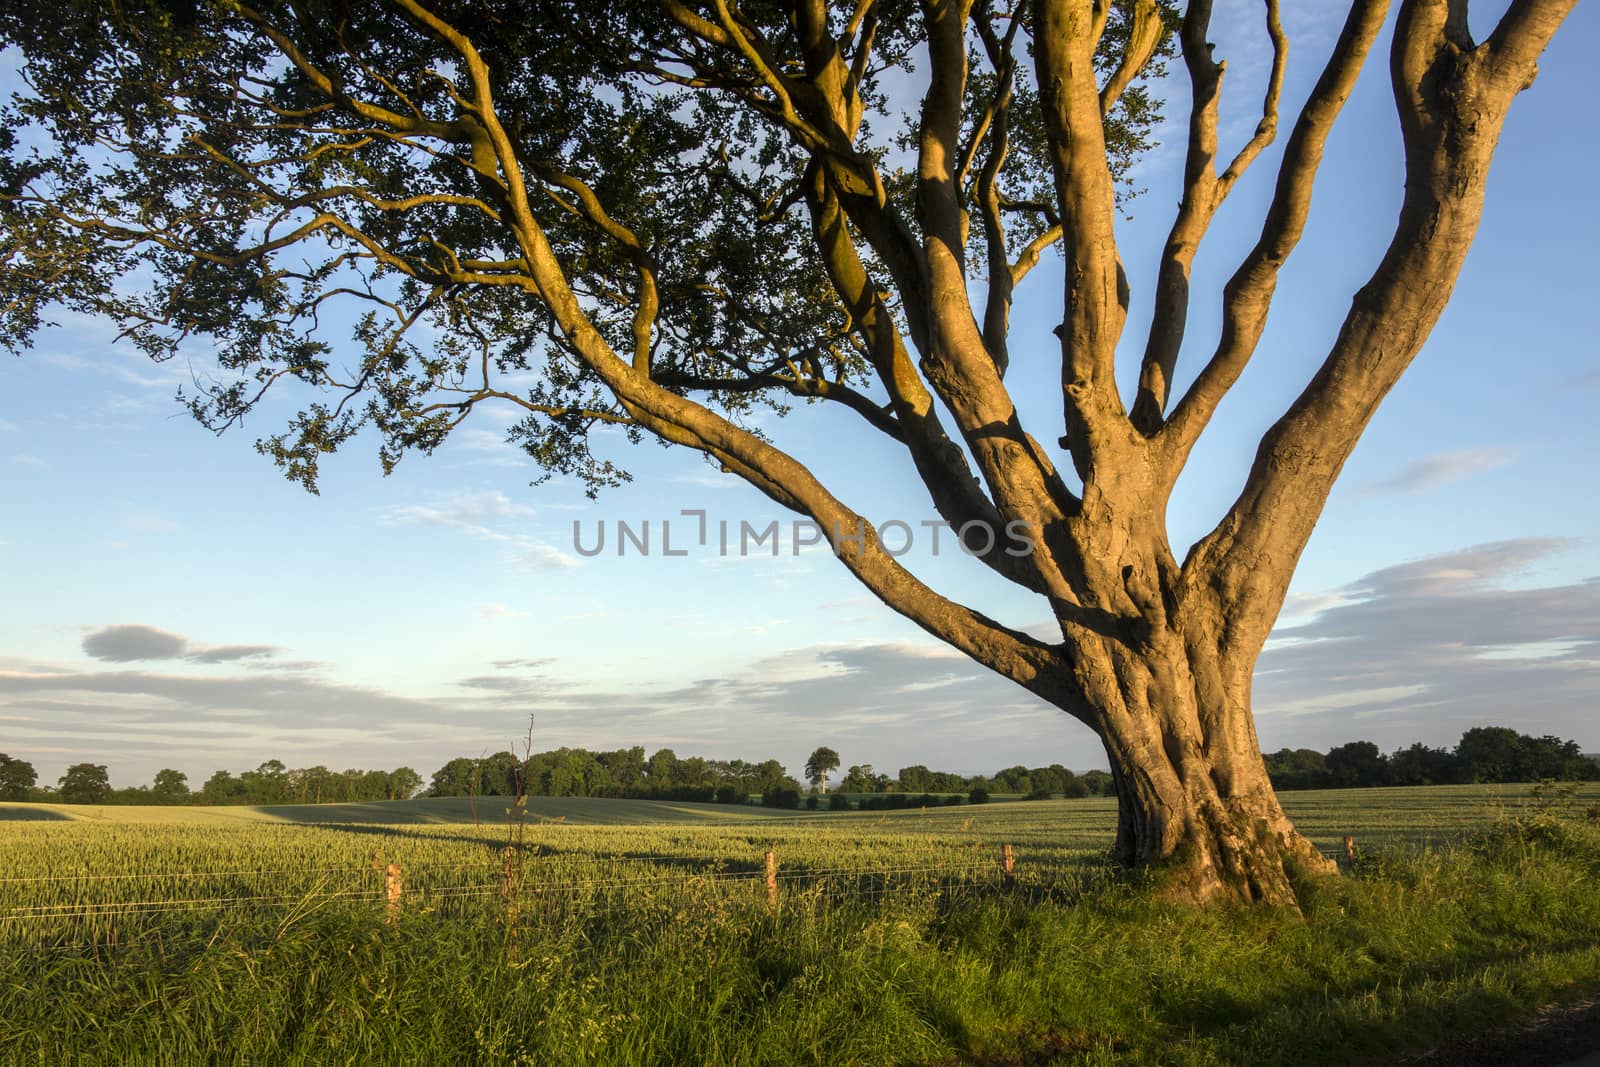 Early morning sunlight on the trees and fields of rural Ireland - County Antrim in Northern Ireland.